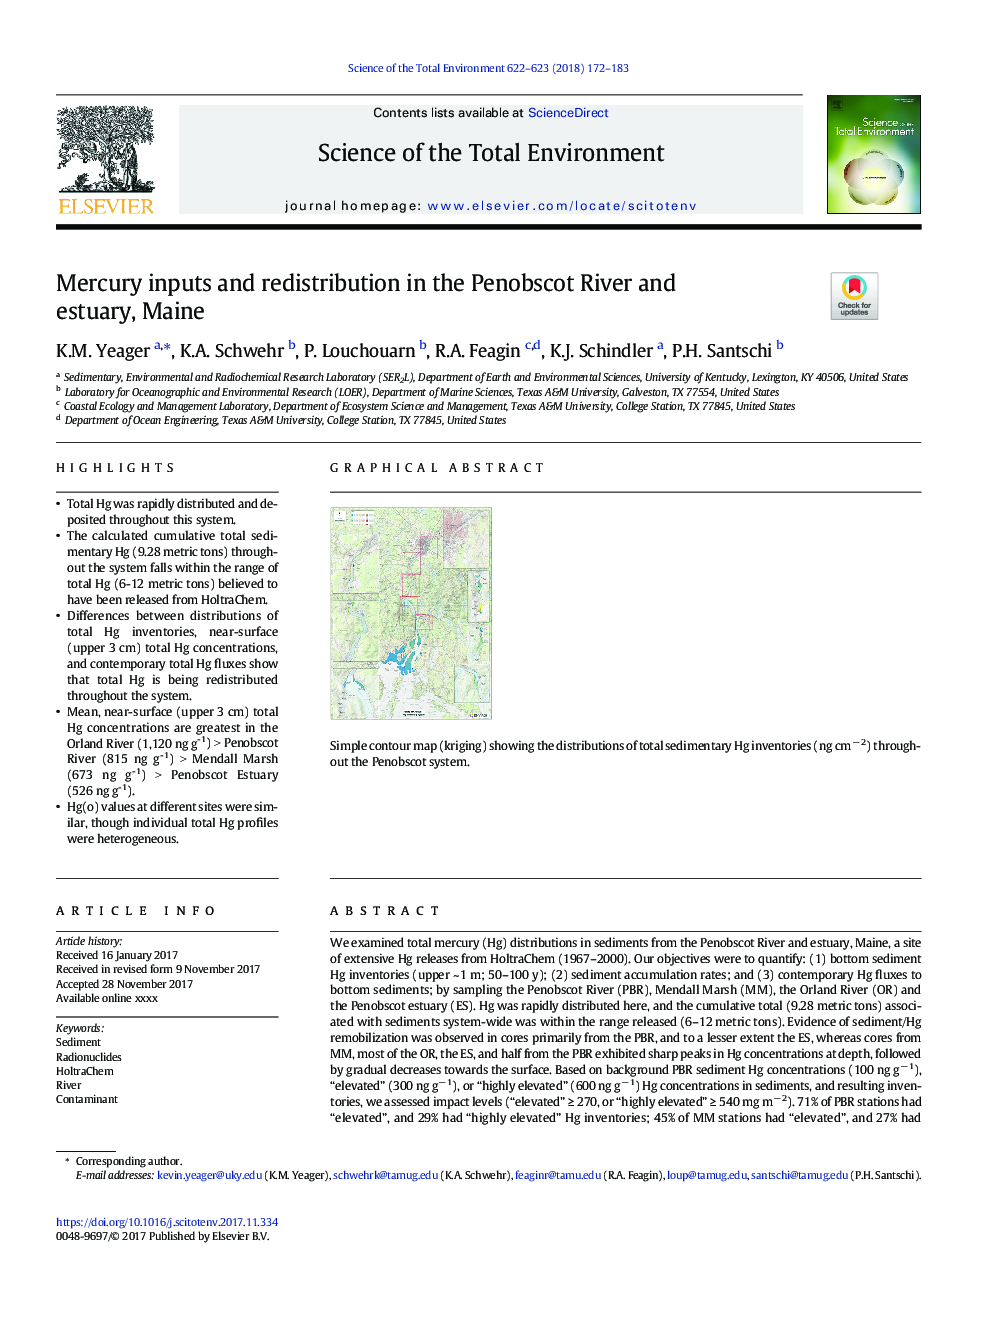 Mercury inputs and redistribution in the Penobscot River and estuary, Maine